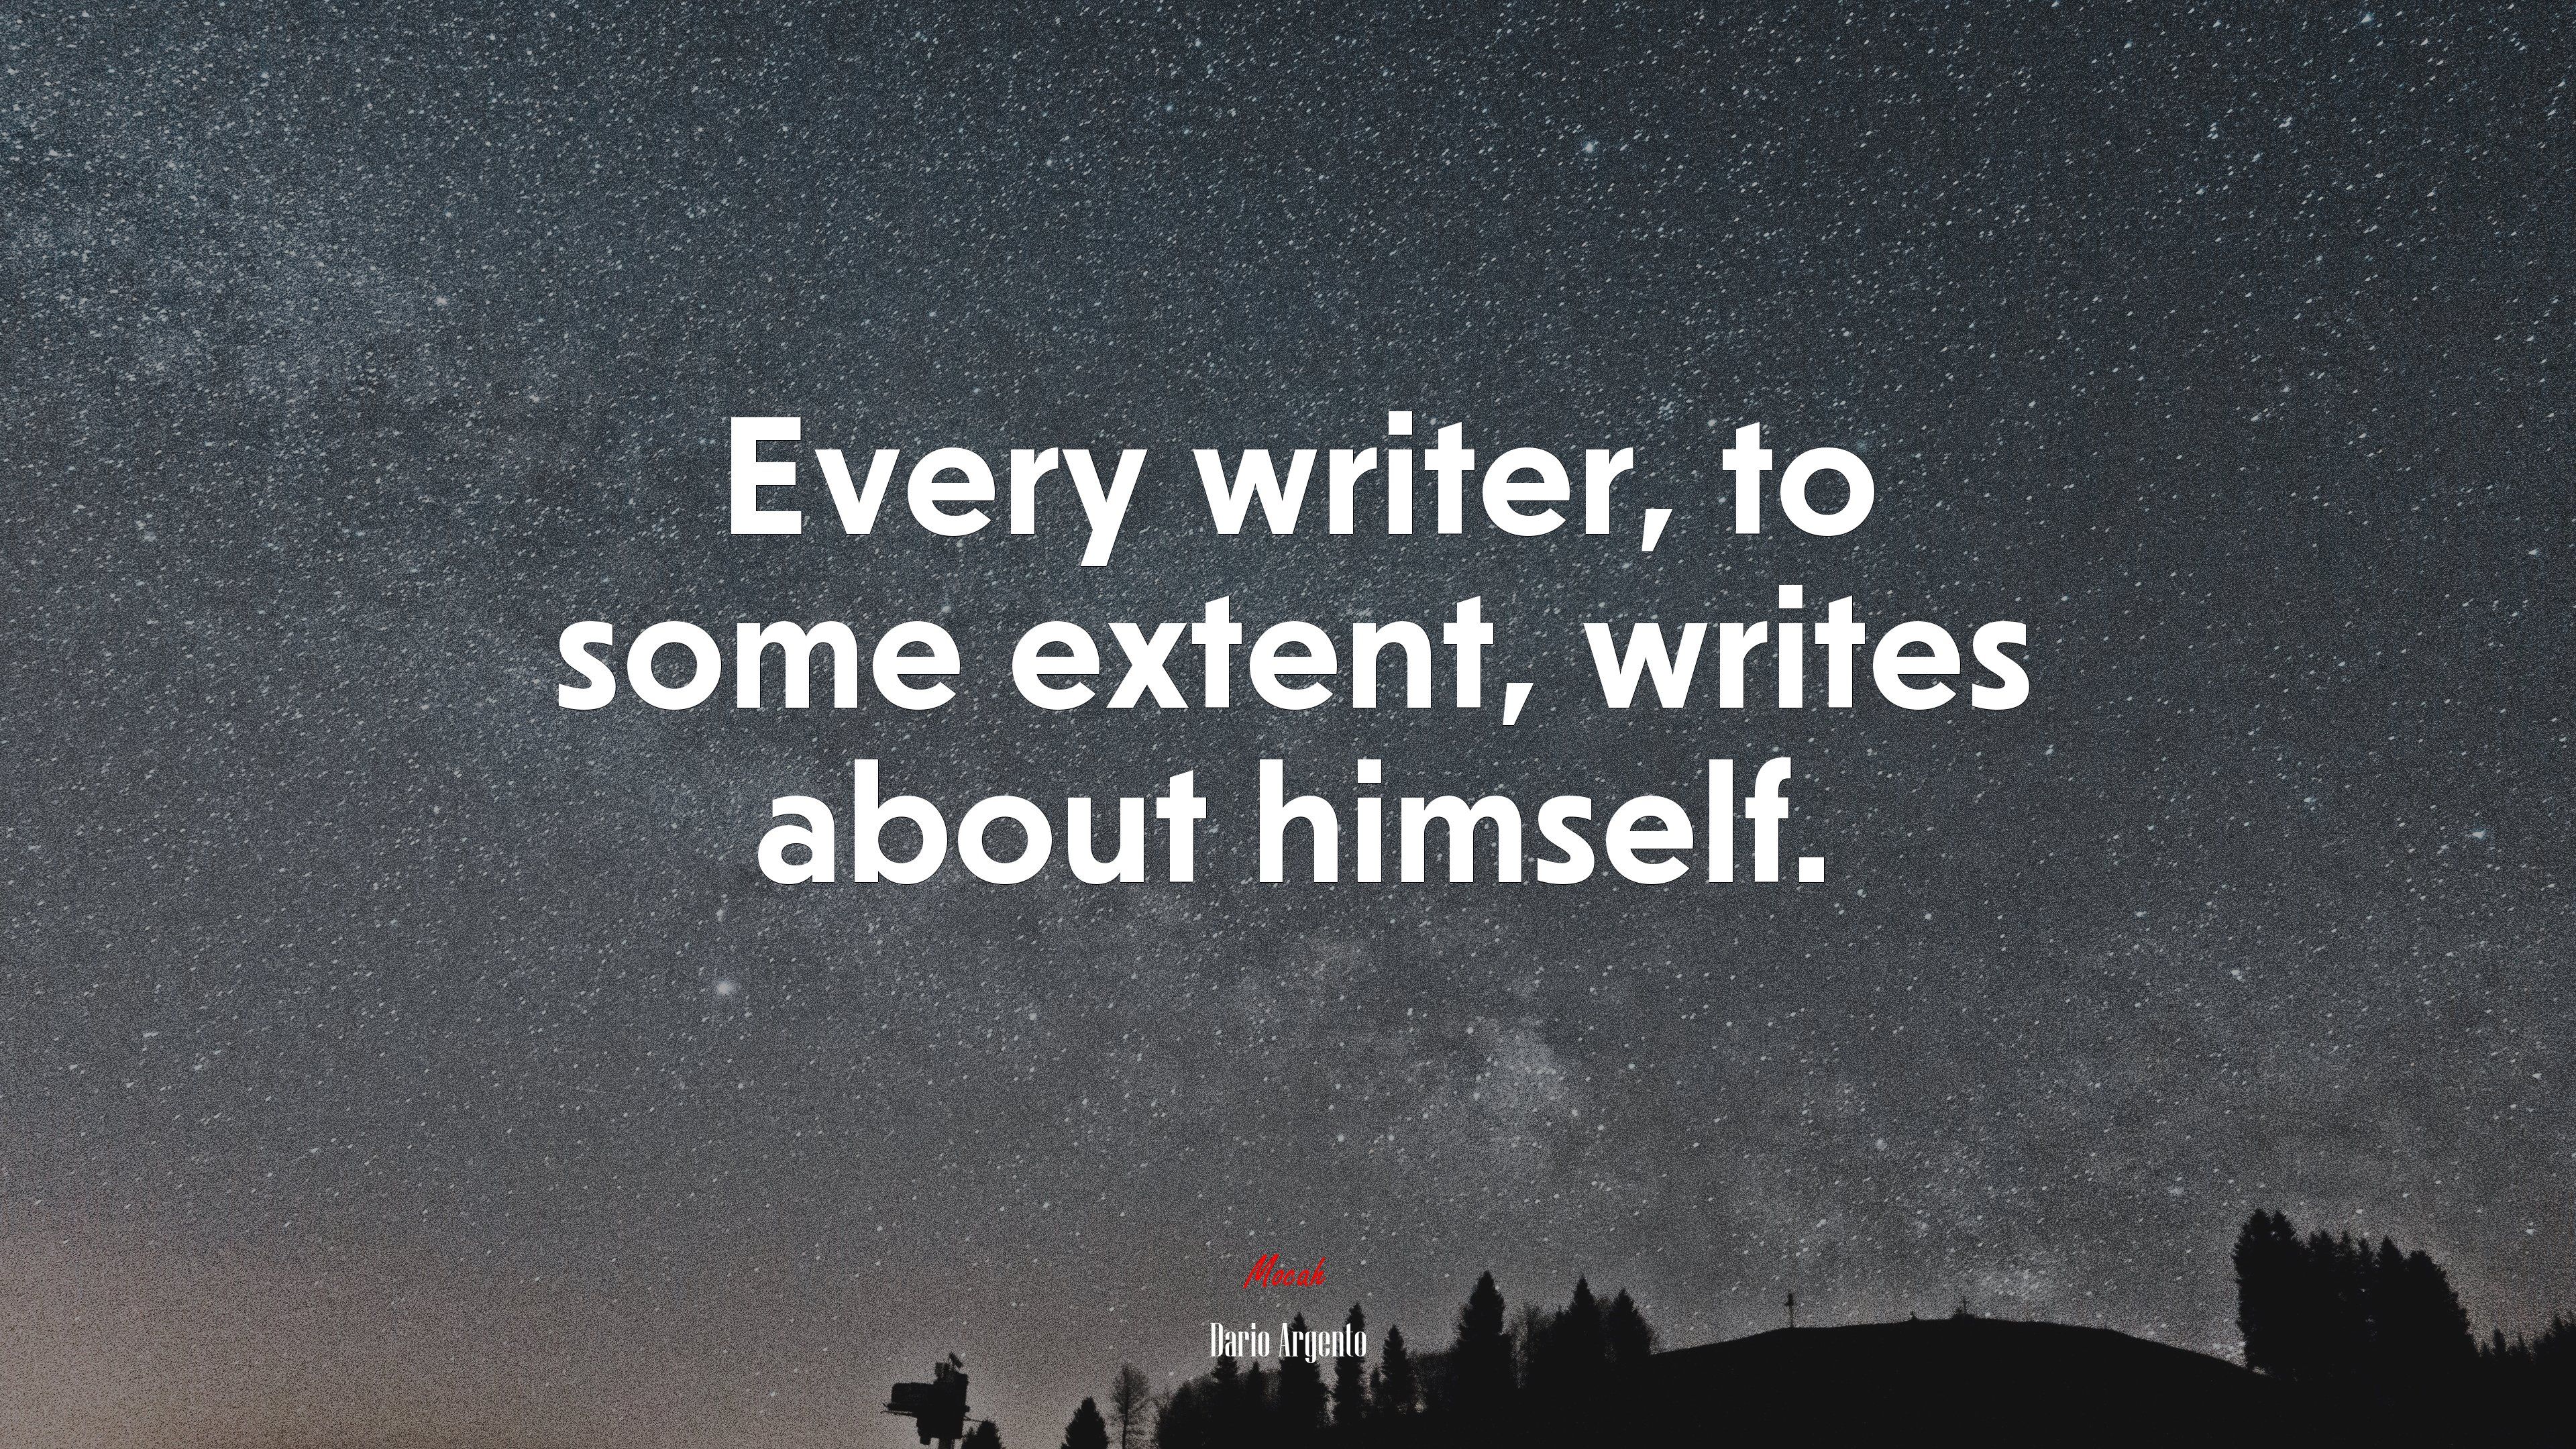 Every writer, to some extent, writes about himself. Dario Argento quote, 4k wallpaper. Mocah HD Wallpaper